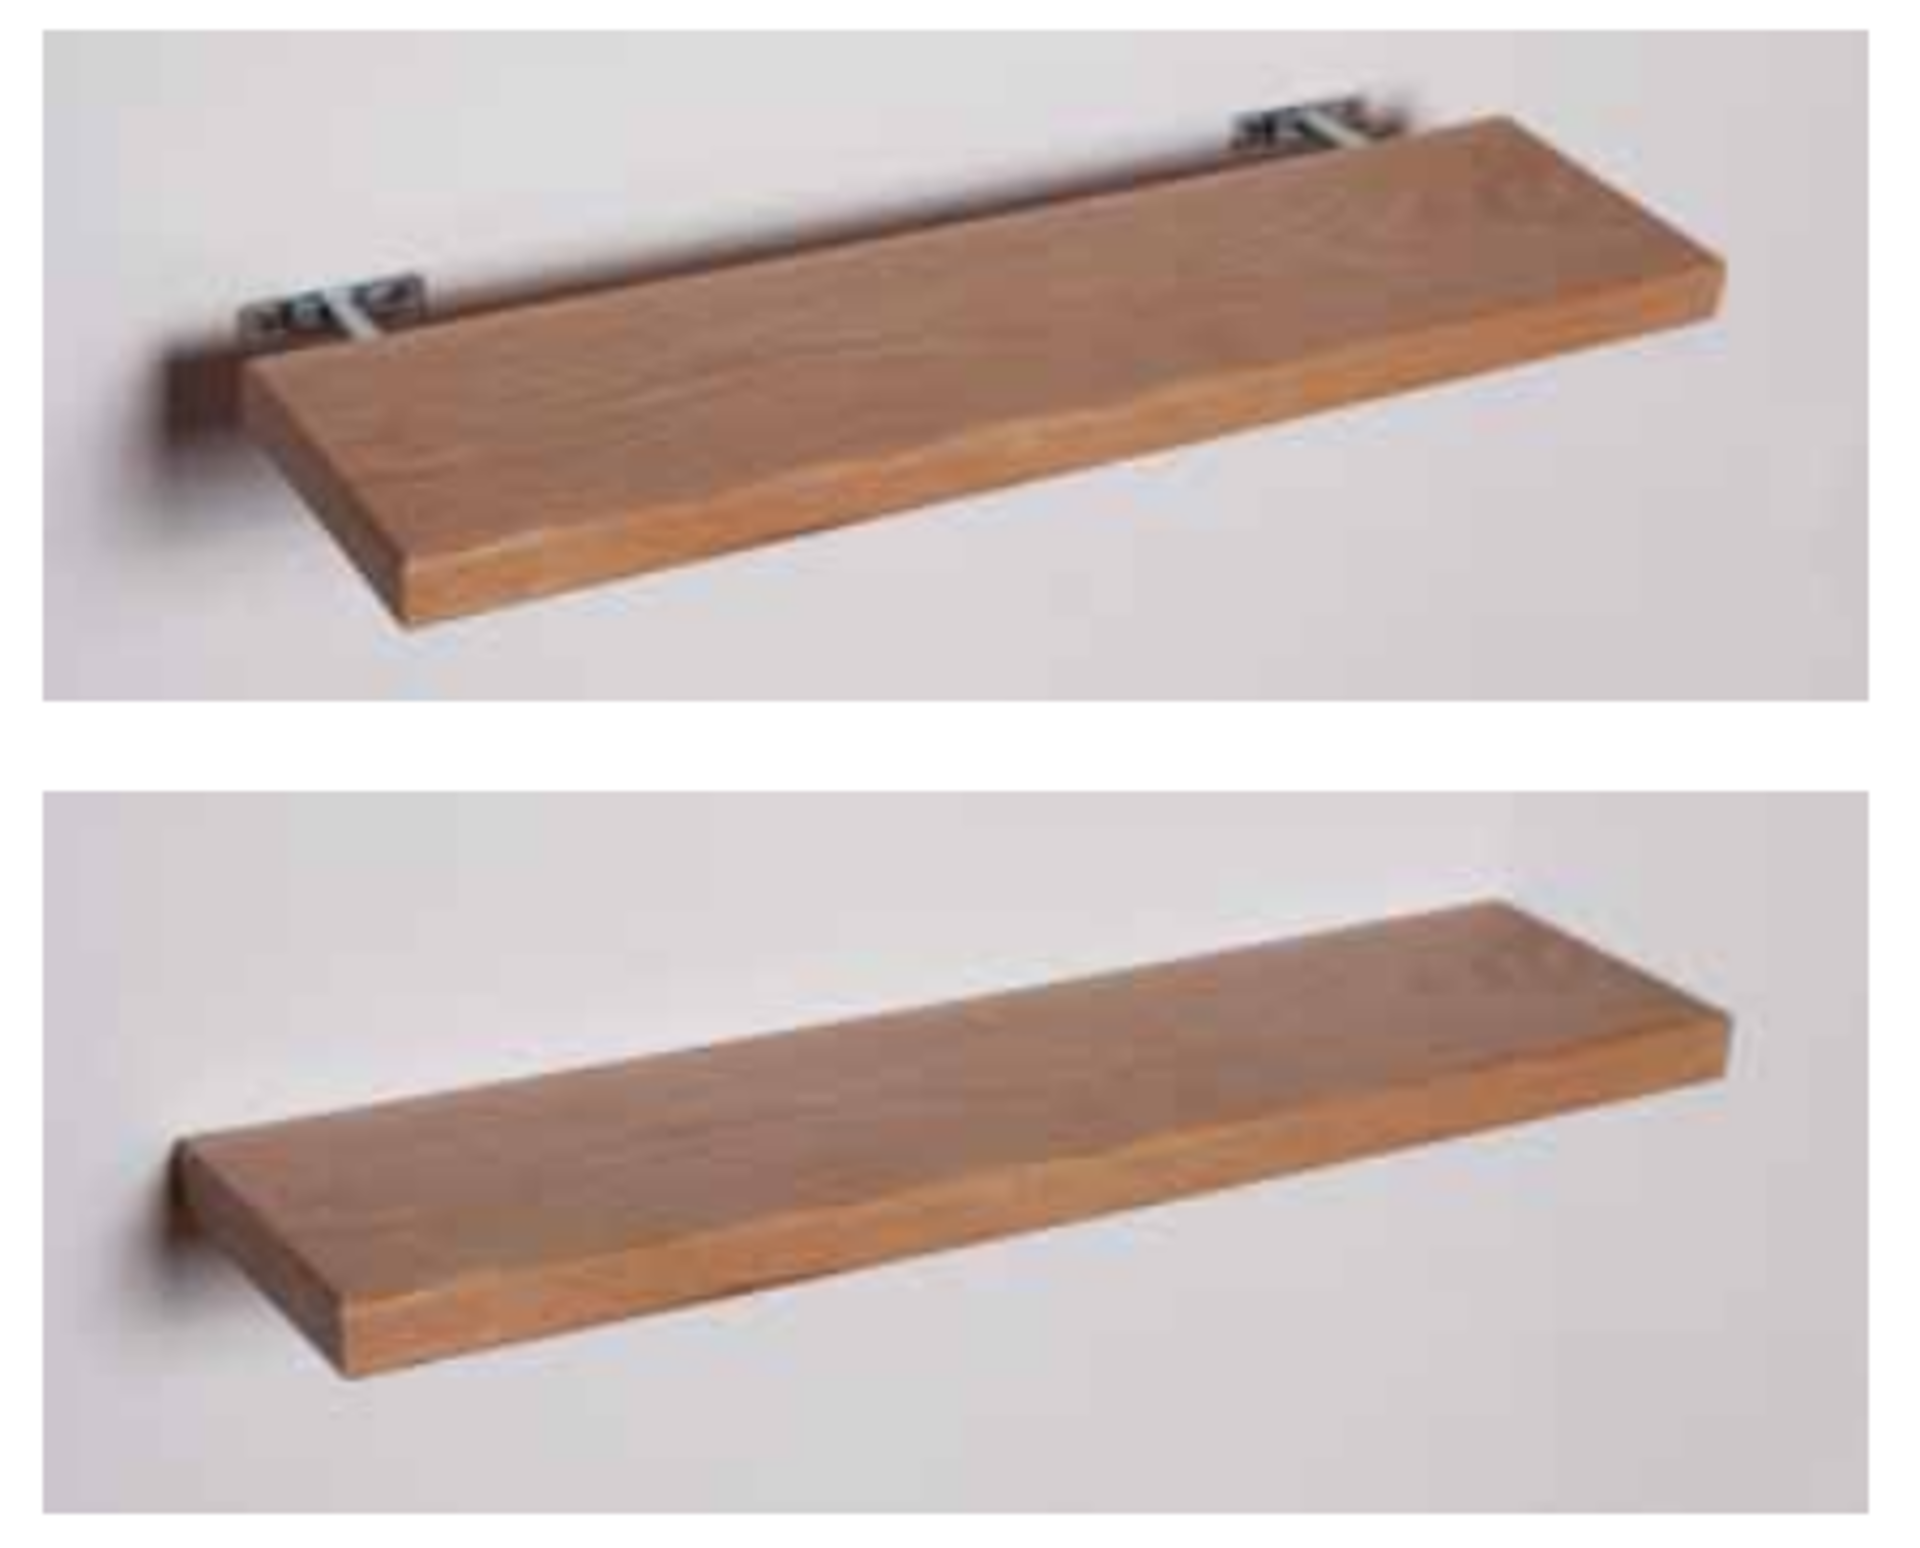 1 x Stonearth Small Bathroom Storage Shelf With Concealed Brackets - American Solid WALNUT - Image 2 of 12